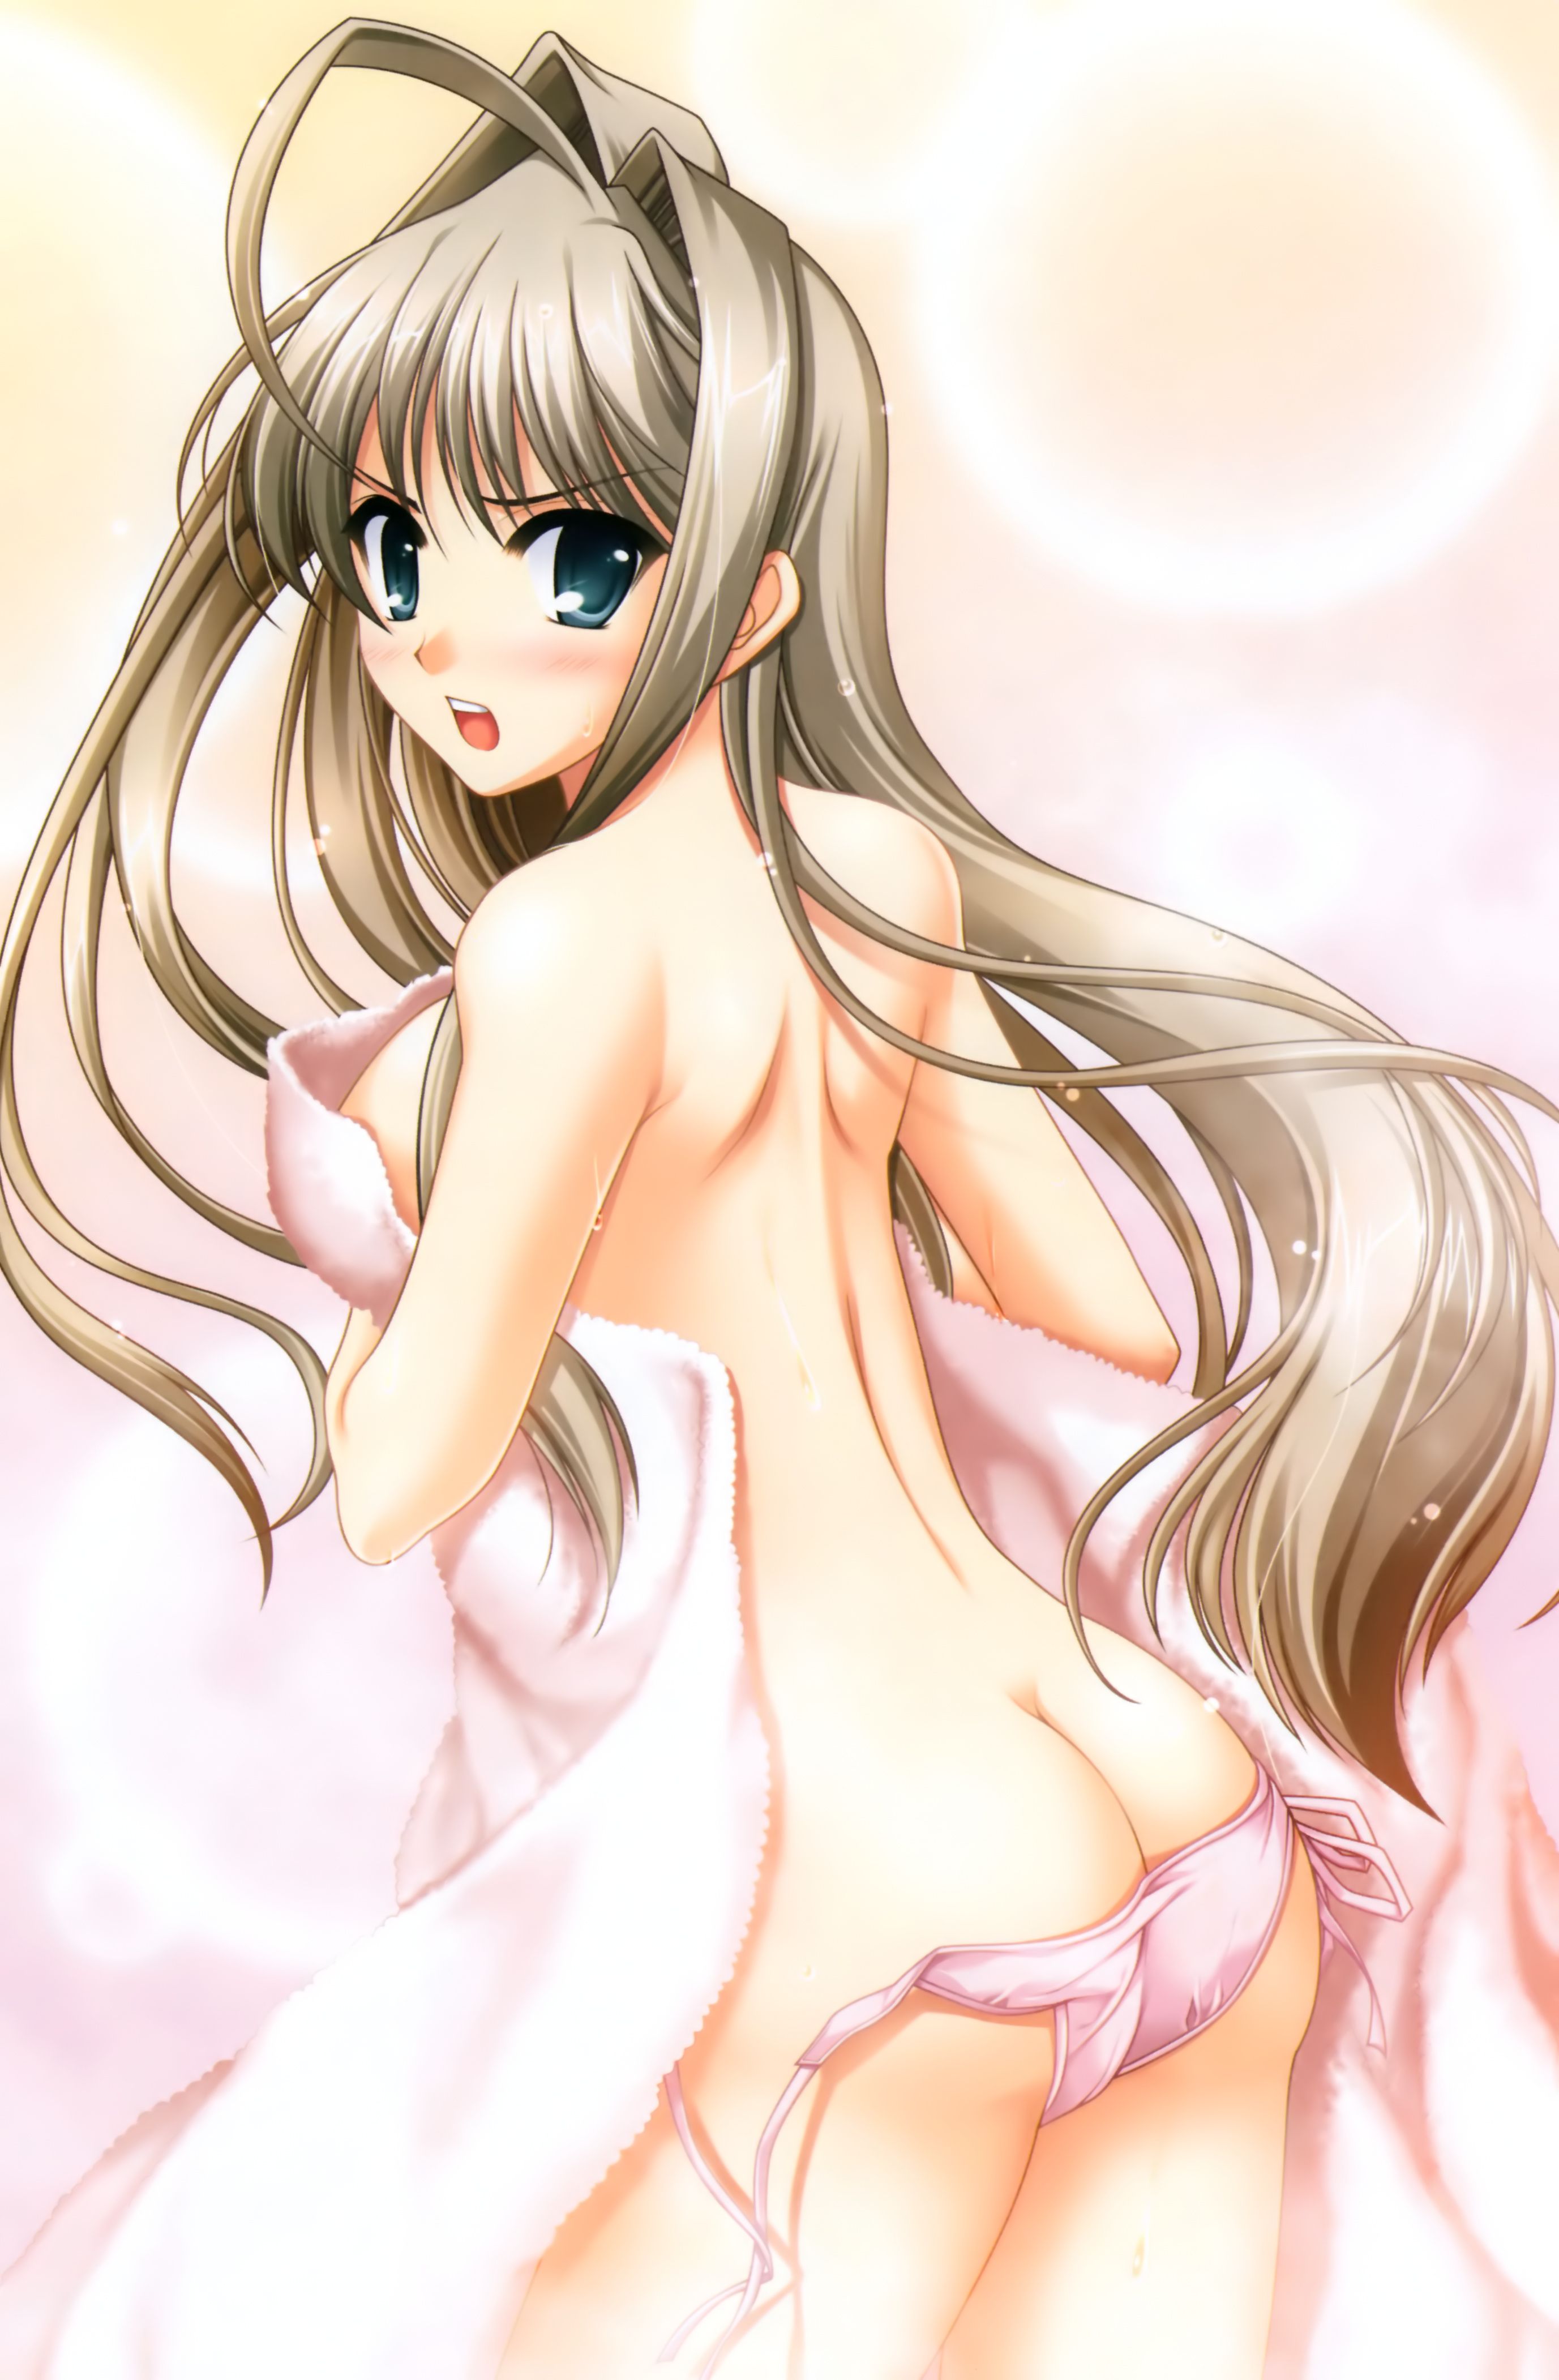 Bath towel one piece from jammed gusto dream! 2 17